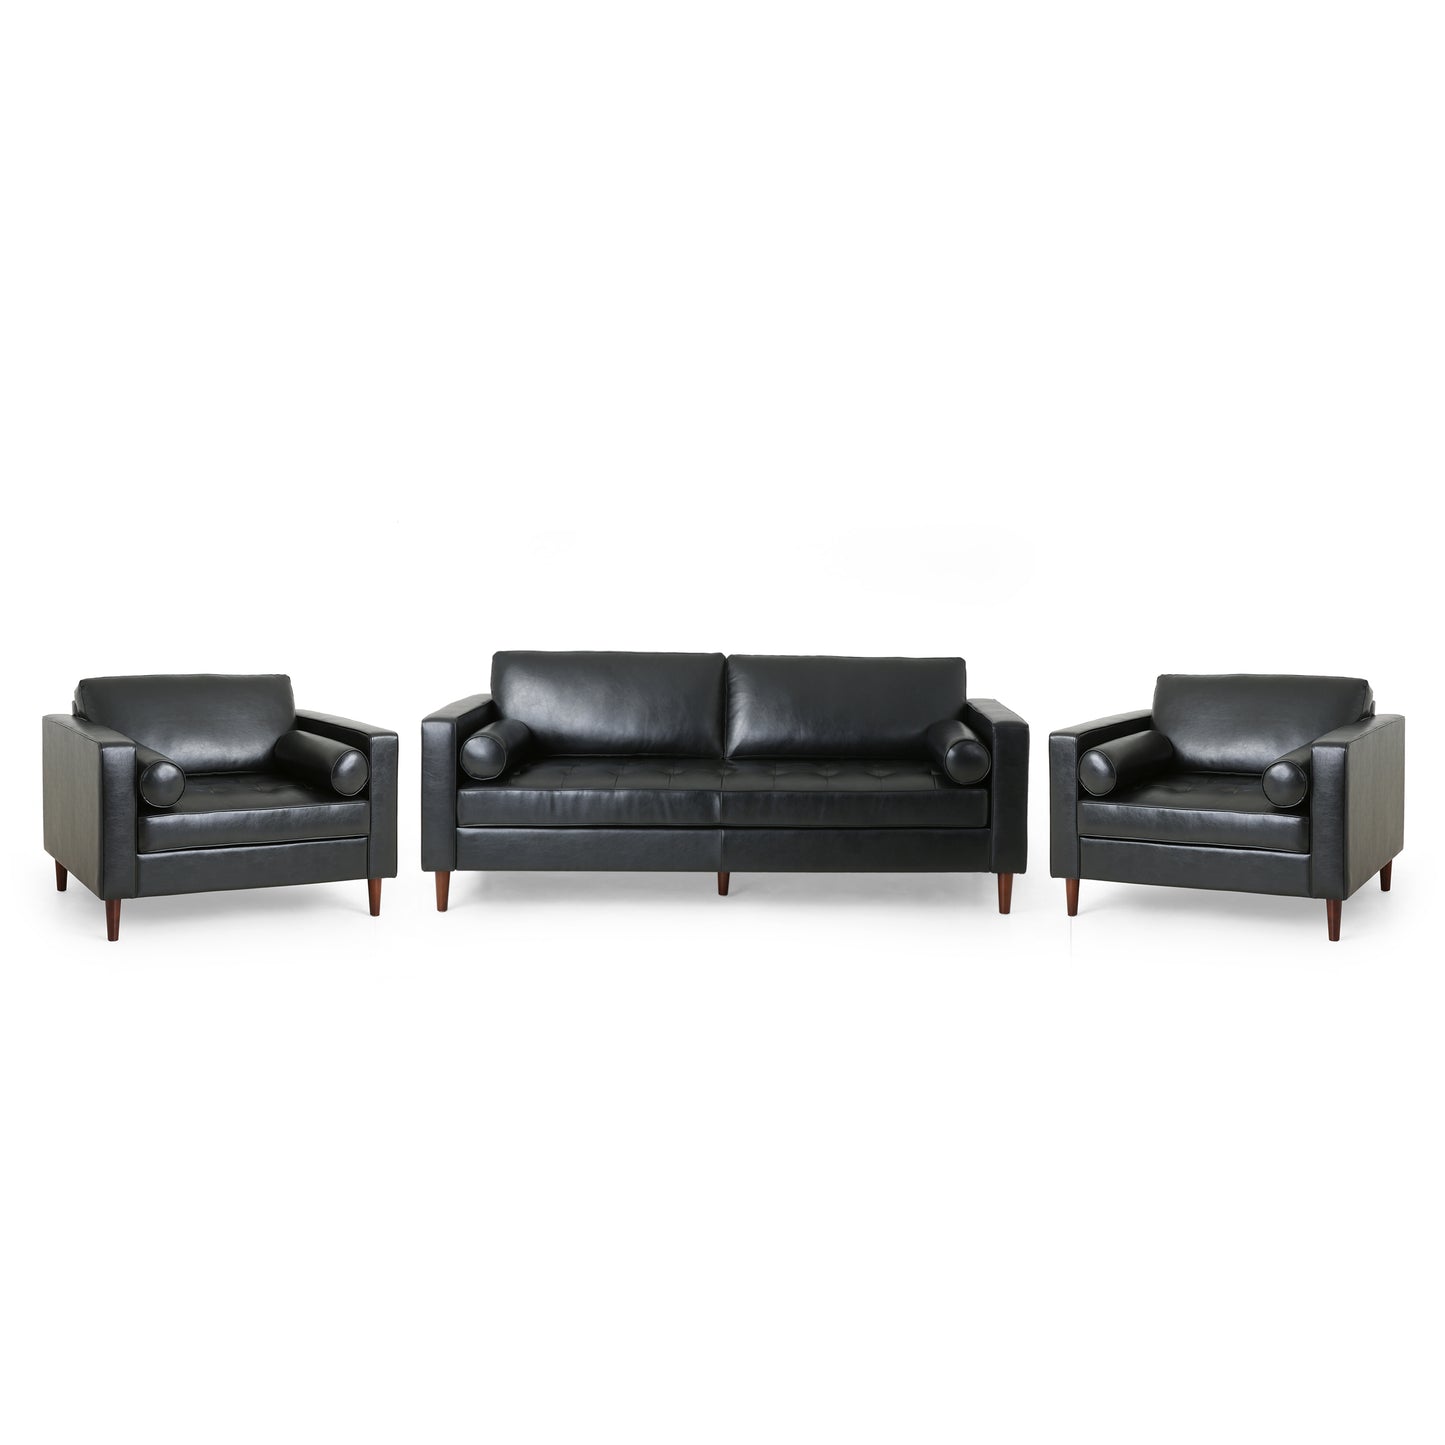 Hixon Contemporary Faux Leather Tufted 3 Piece Sofa and Club Chair Set